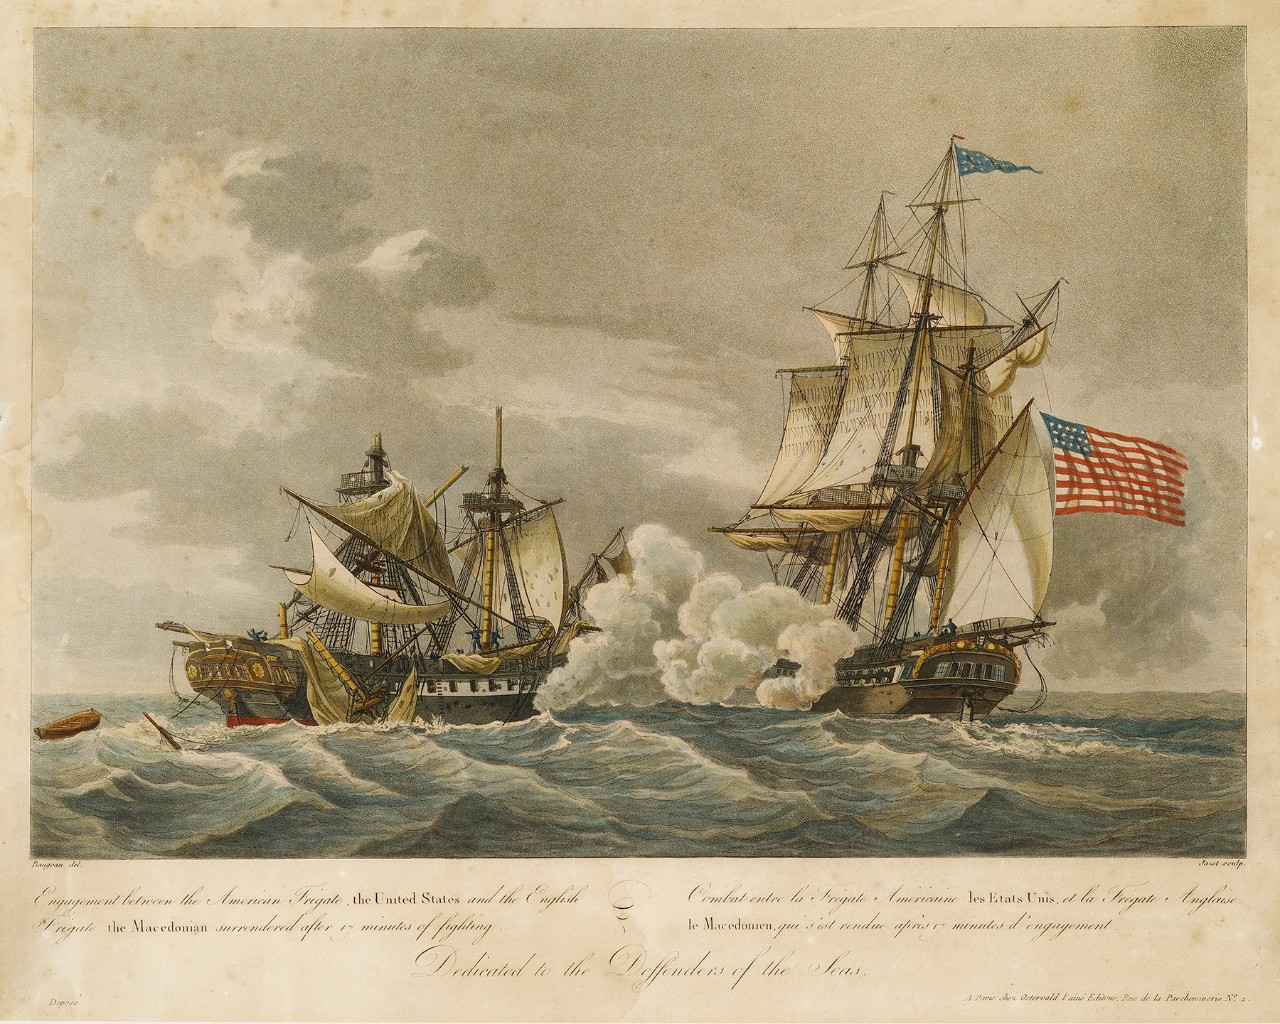 Engagement between the American Frigate United States and the English Frigate Macedonian